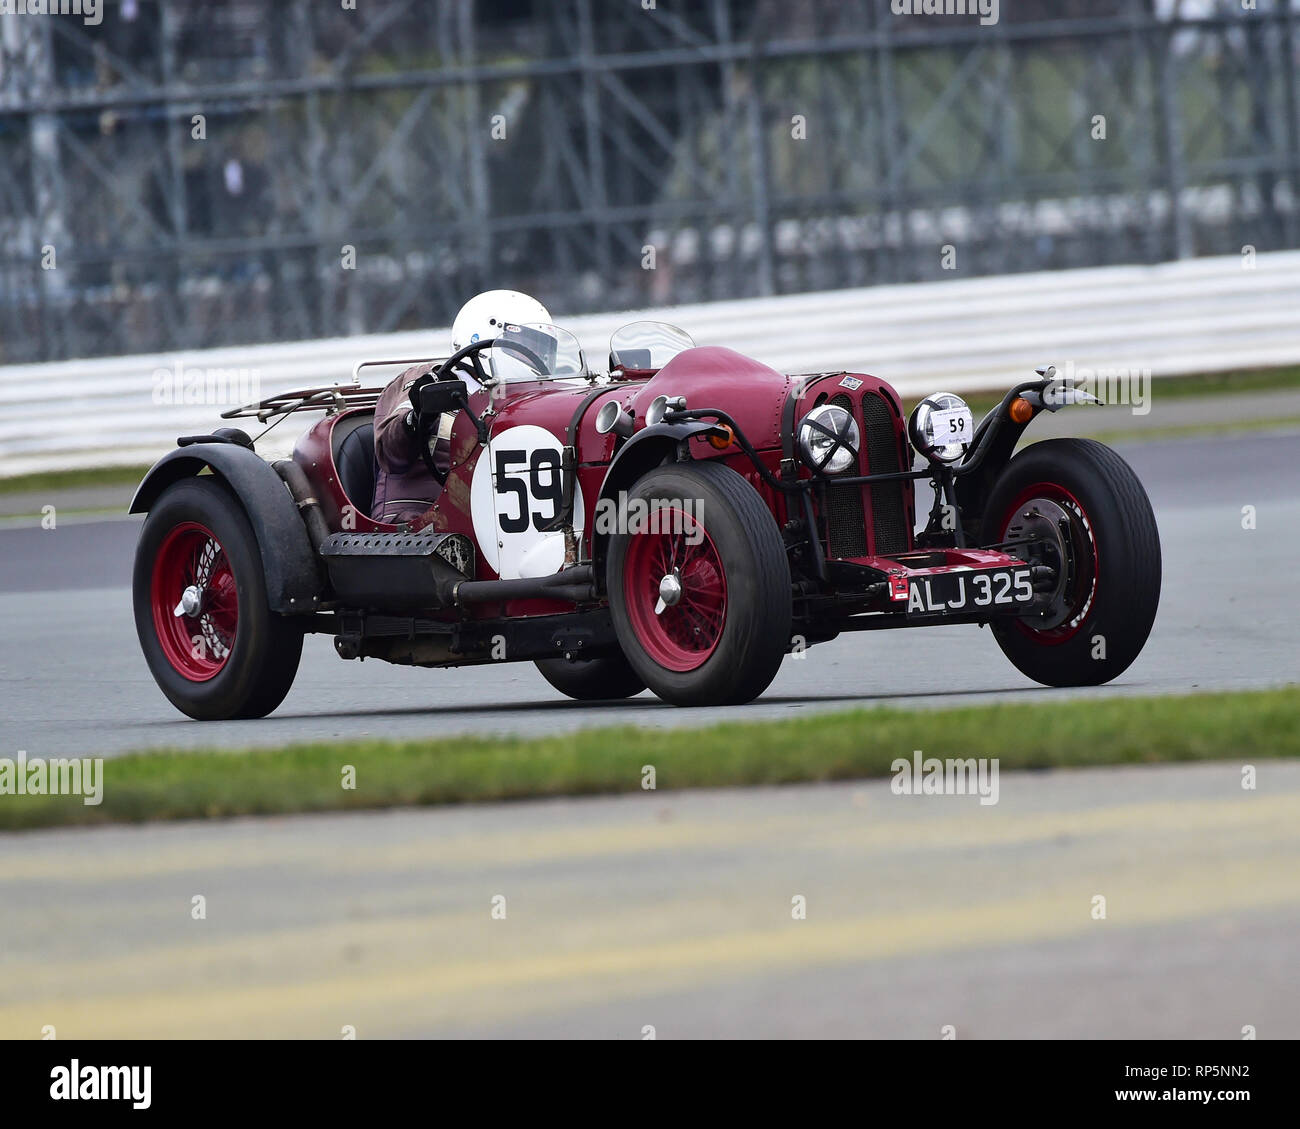 Richard Iliffe, Riley Elf, VSCC, Pomeroy Trophy, Silverstone, 16th February 2019, cars, competition, February, Fun, historic cars, iconic, motor sport Stock Photo